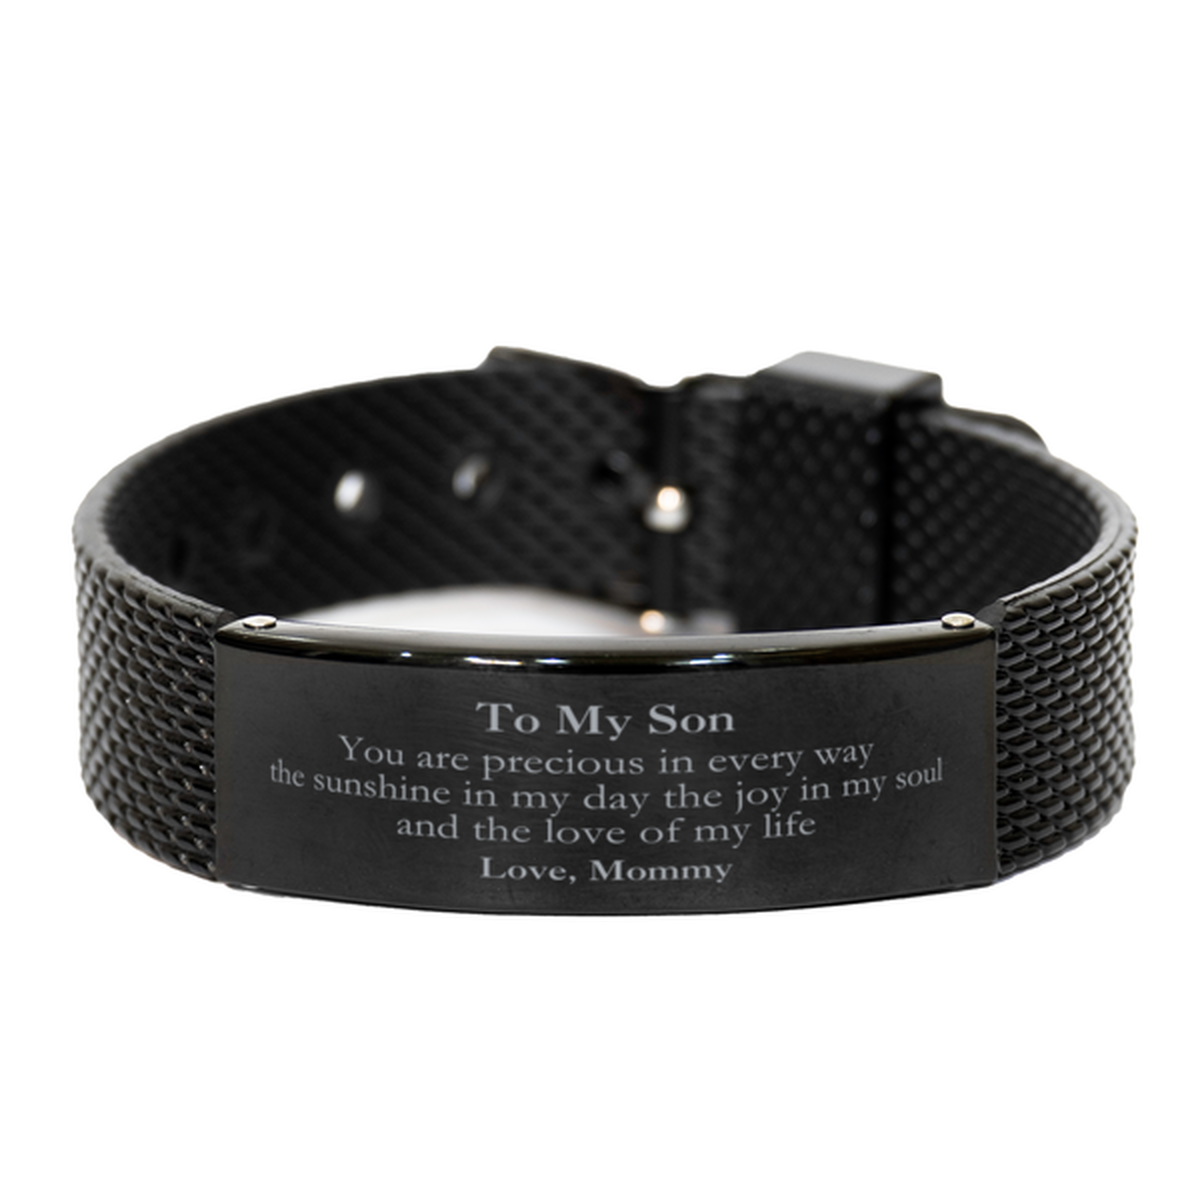 Graduation Gifts for Son Black Shark Mesh Bracelet Present from Mommy, Christmas Son Birthday Gifts Son You are precious in every way the sunshine in my day. Love, Mommy